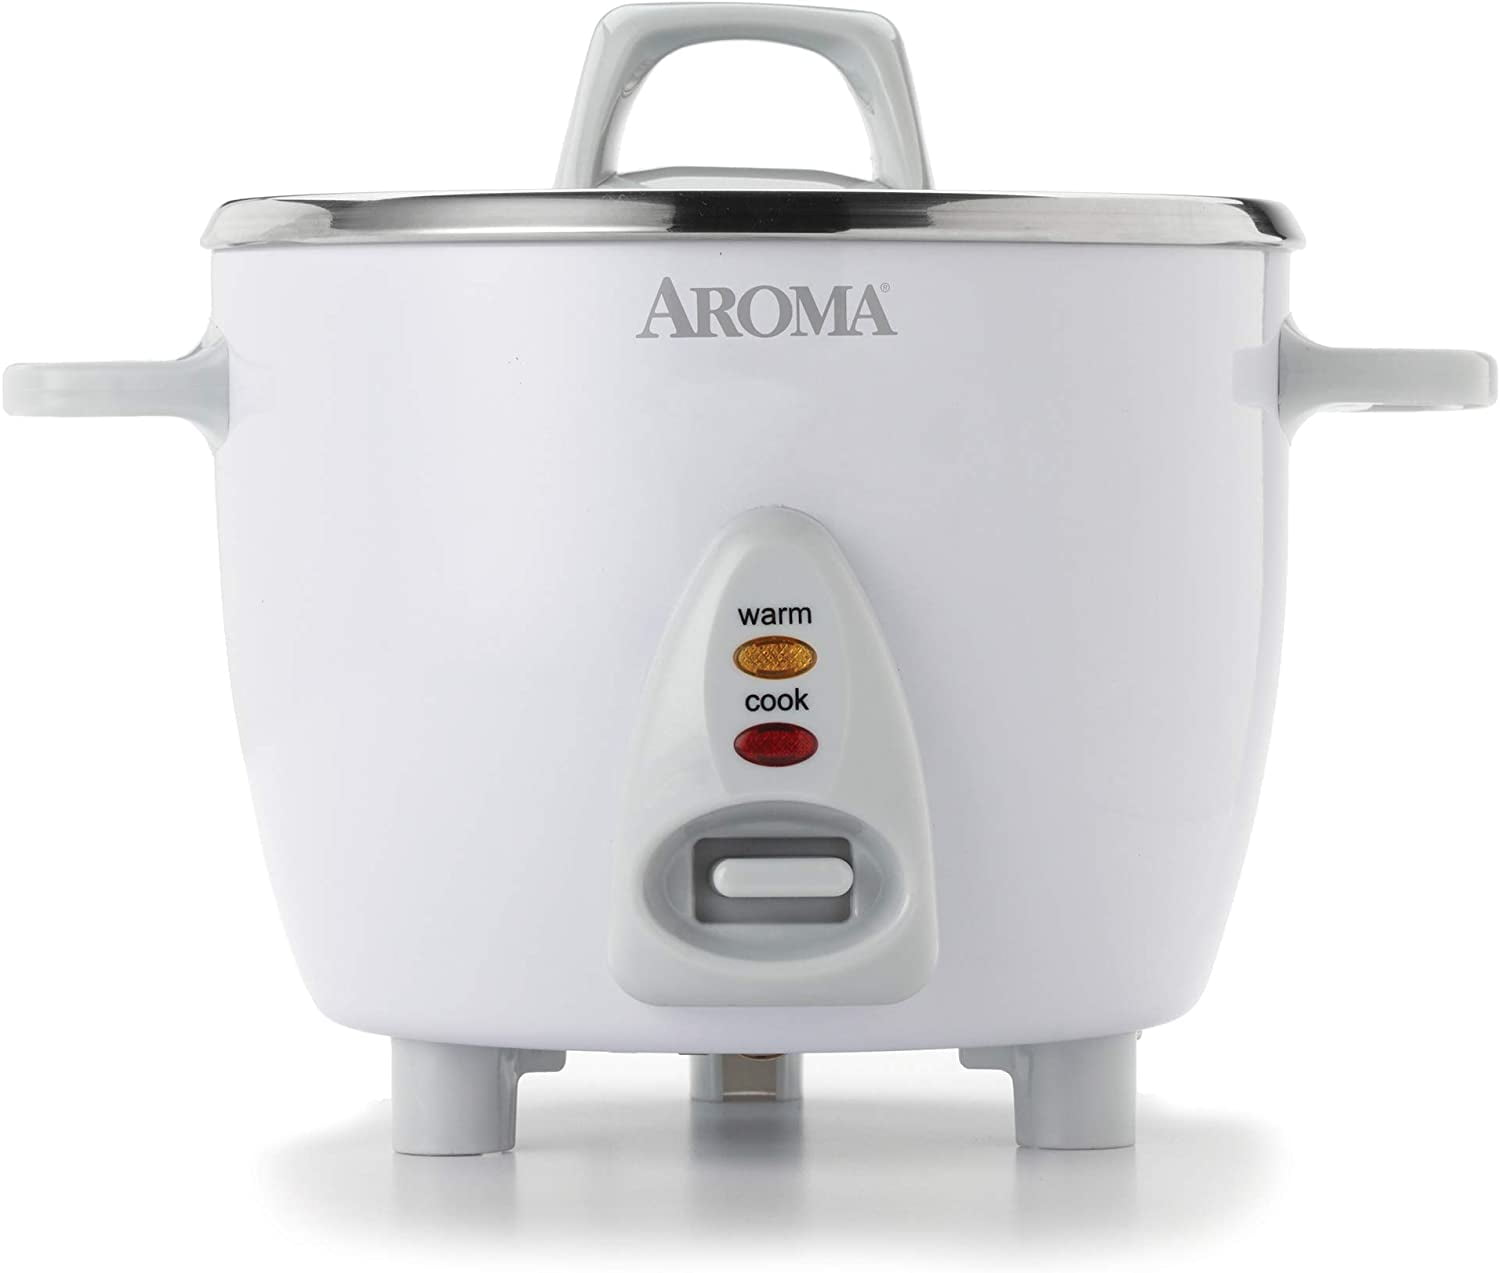 Aroma ARC-3000SB 10 Cup Rice Cooker - Versatile Lightly-used pre boxed